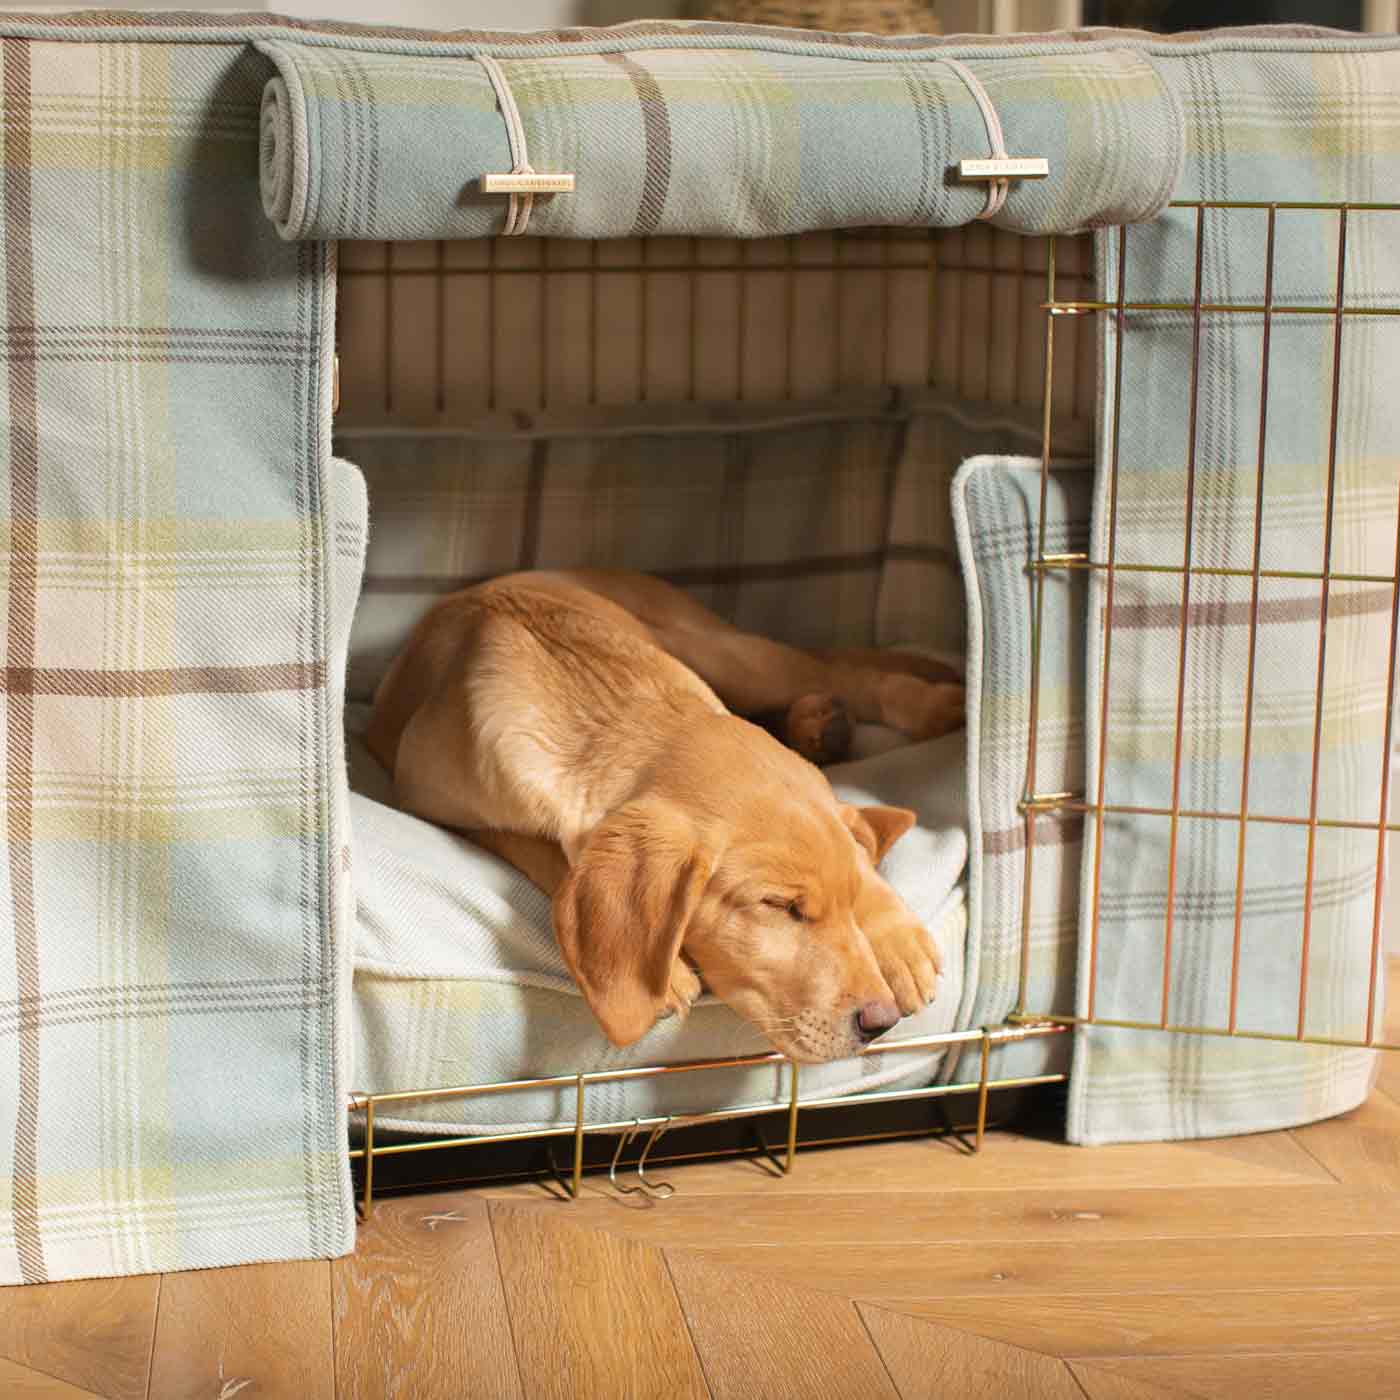 Luxury Heavy Duty Dog Crate, In Stunning Balmoral Duck Egg Tweed Crate Set, The Perfect Dog Crate Set For Building The Ultimate Pet Den! Dog Crate Cover Available To Personalise at Lords & Labradors 